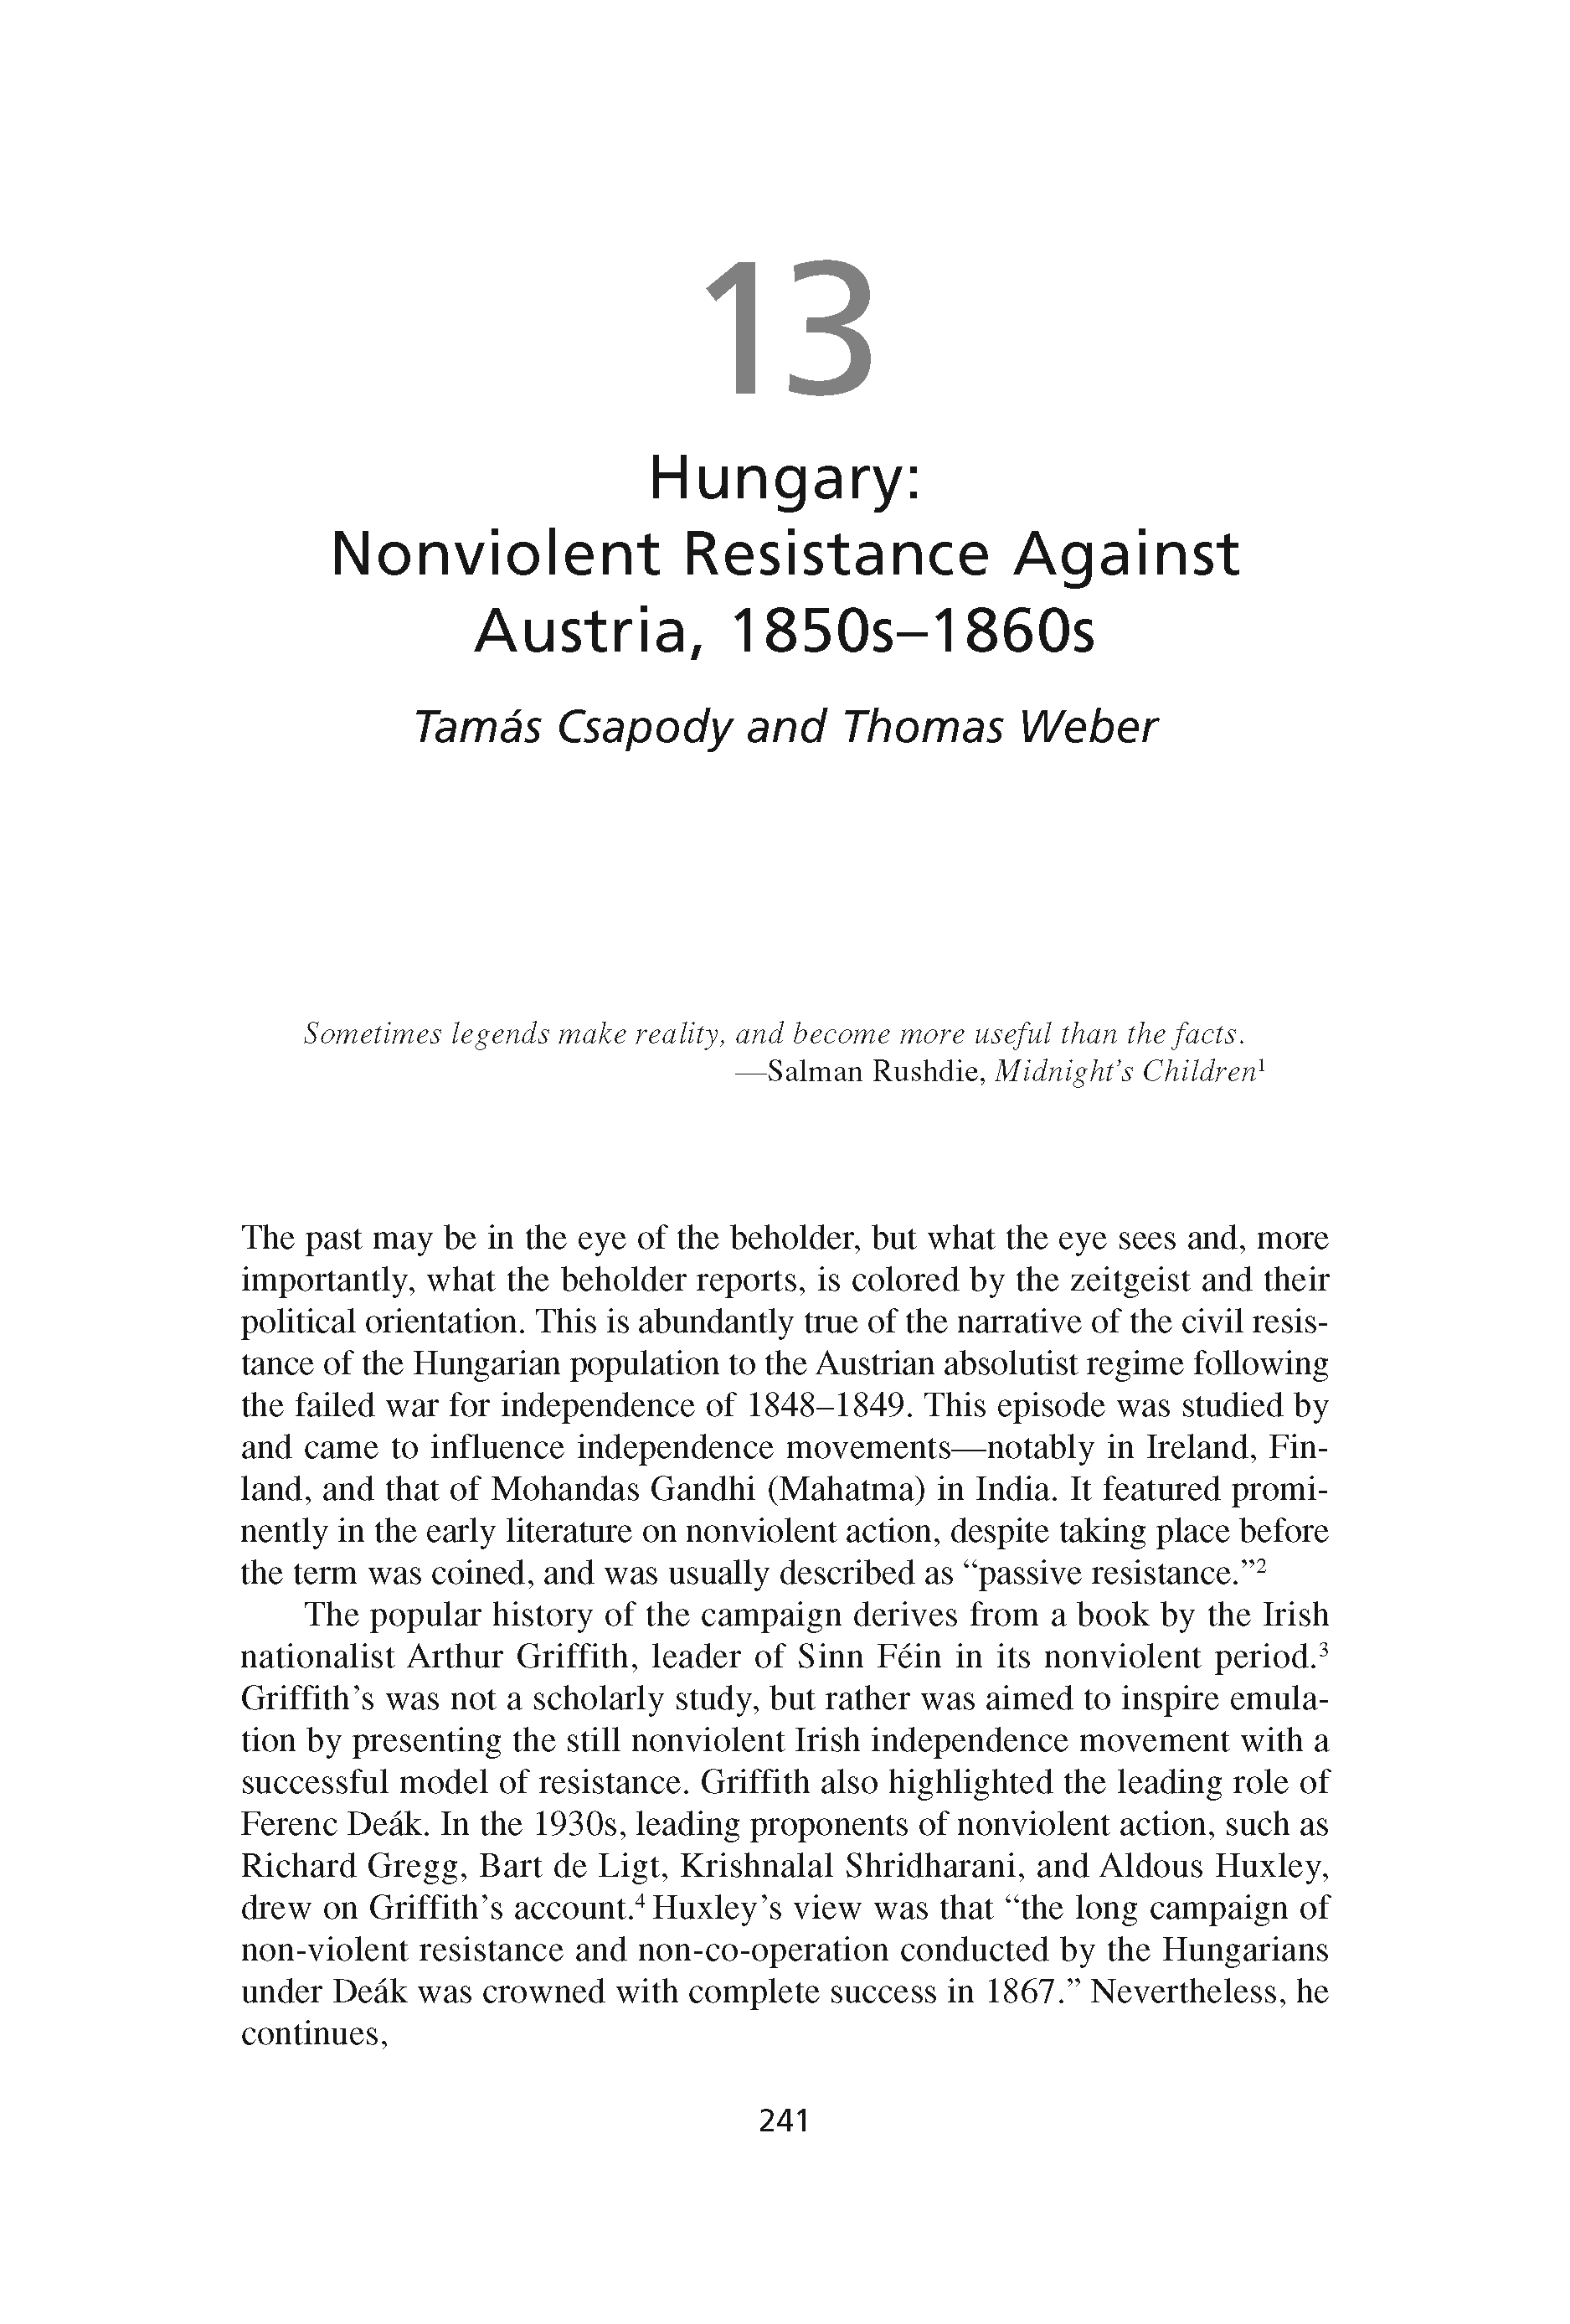 Hungary: Nonviolent Resistance Against Austria, 1850s-1860s (Chapter 13 from ‘Recovering Nonviolent History’)